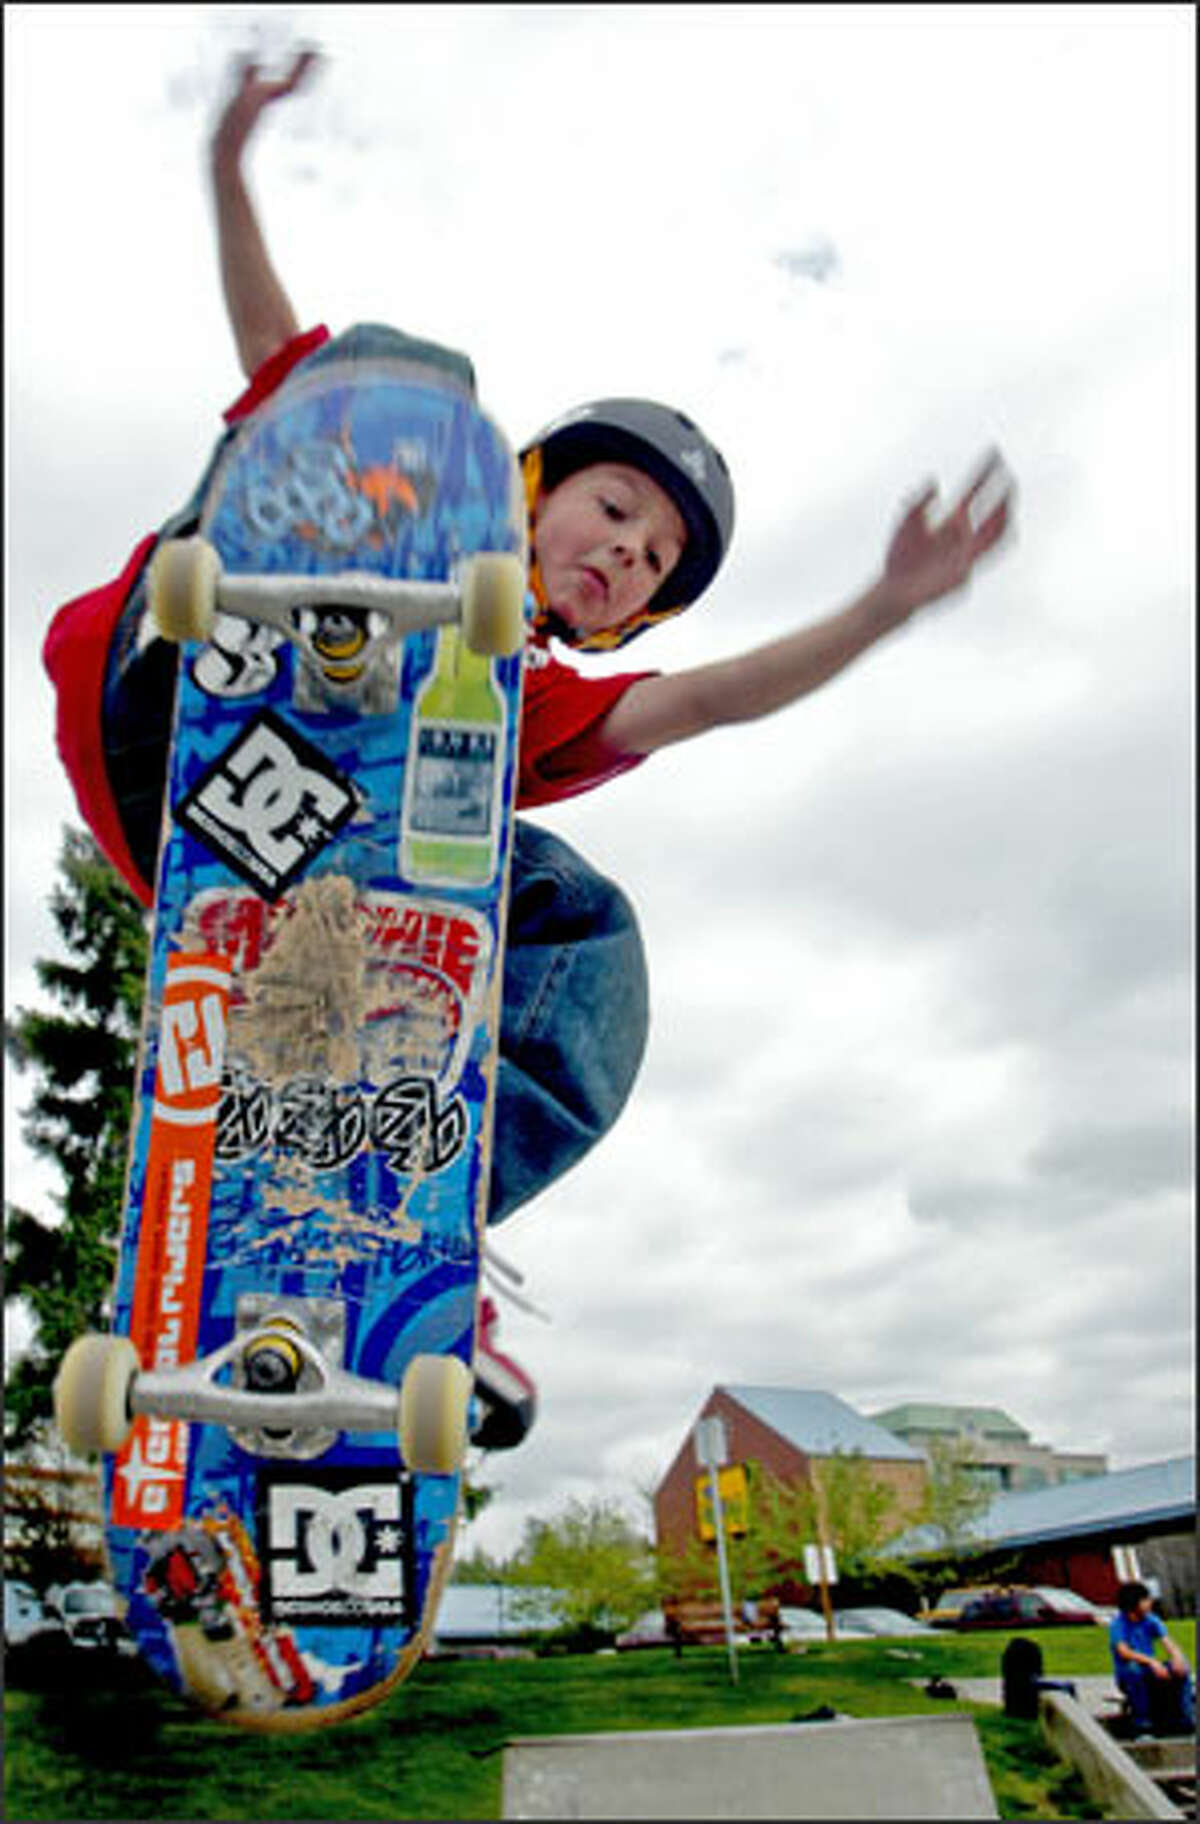 Mitchie Brusco, 8, practices his moves at the skateboard park in Kirkland. The first-grader, who's been skateboarding since he was 3, already has racked up sponsorships and media appearances. He says he doesn't know what drew him to skateboarding.